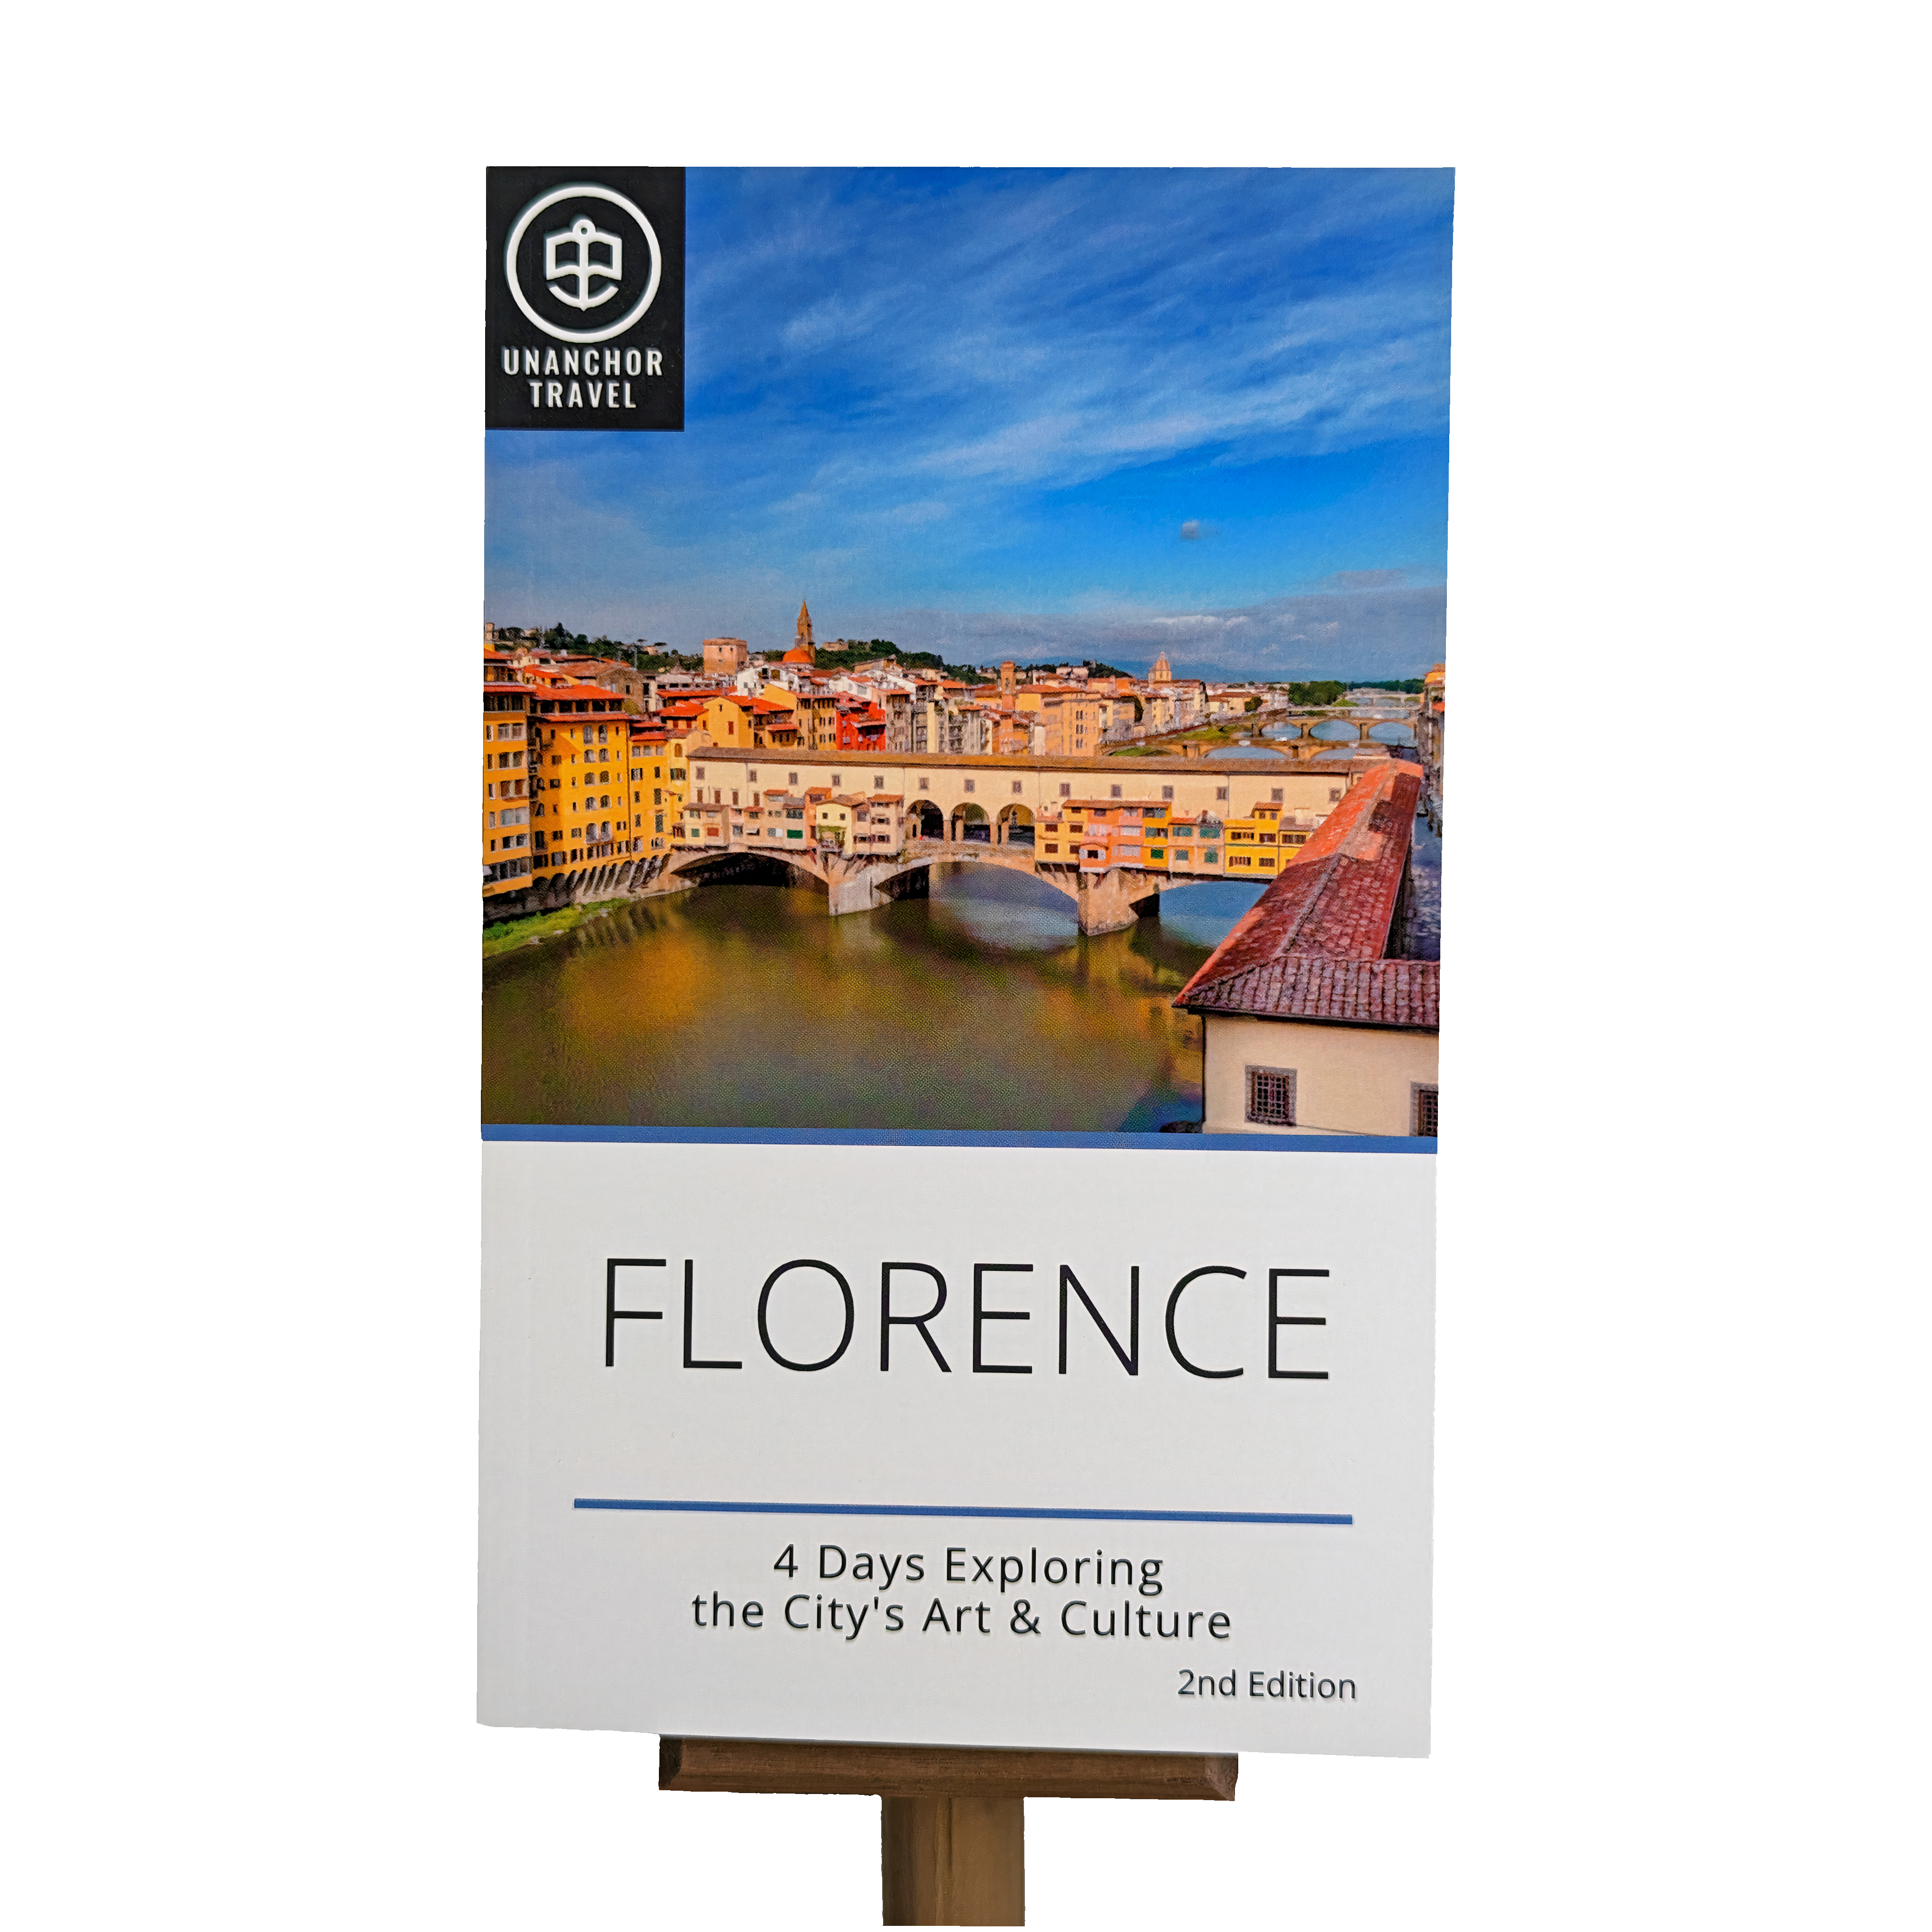 Florence, Italy: 4 Days Exploring the City's Art & Culture